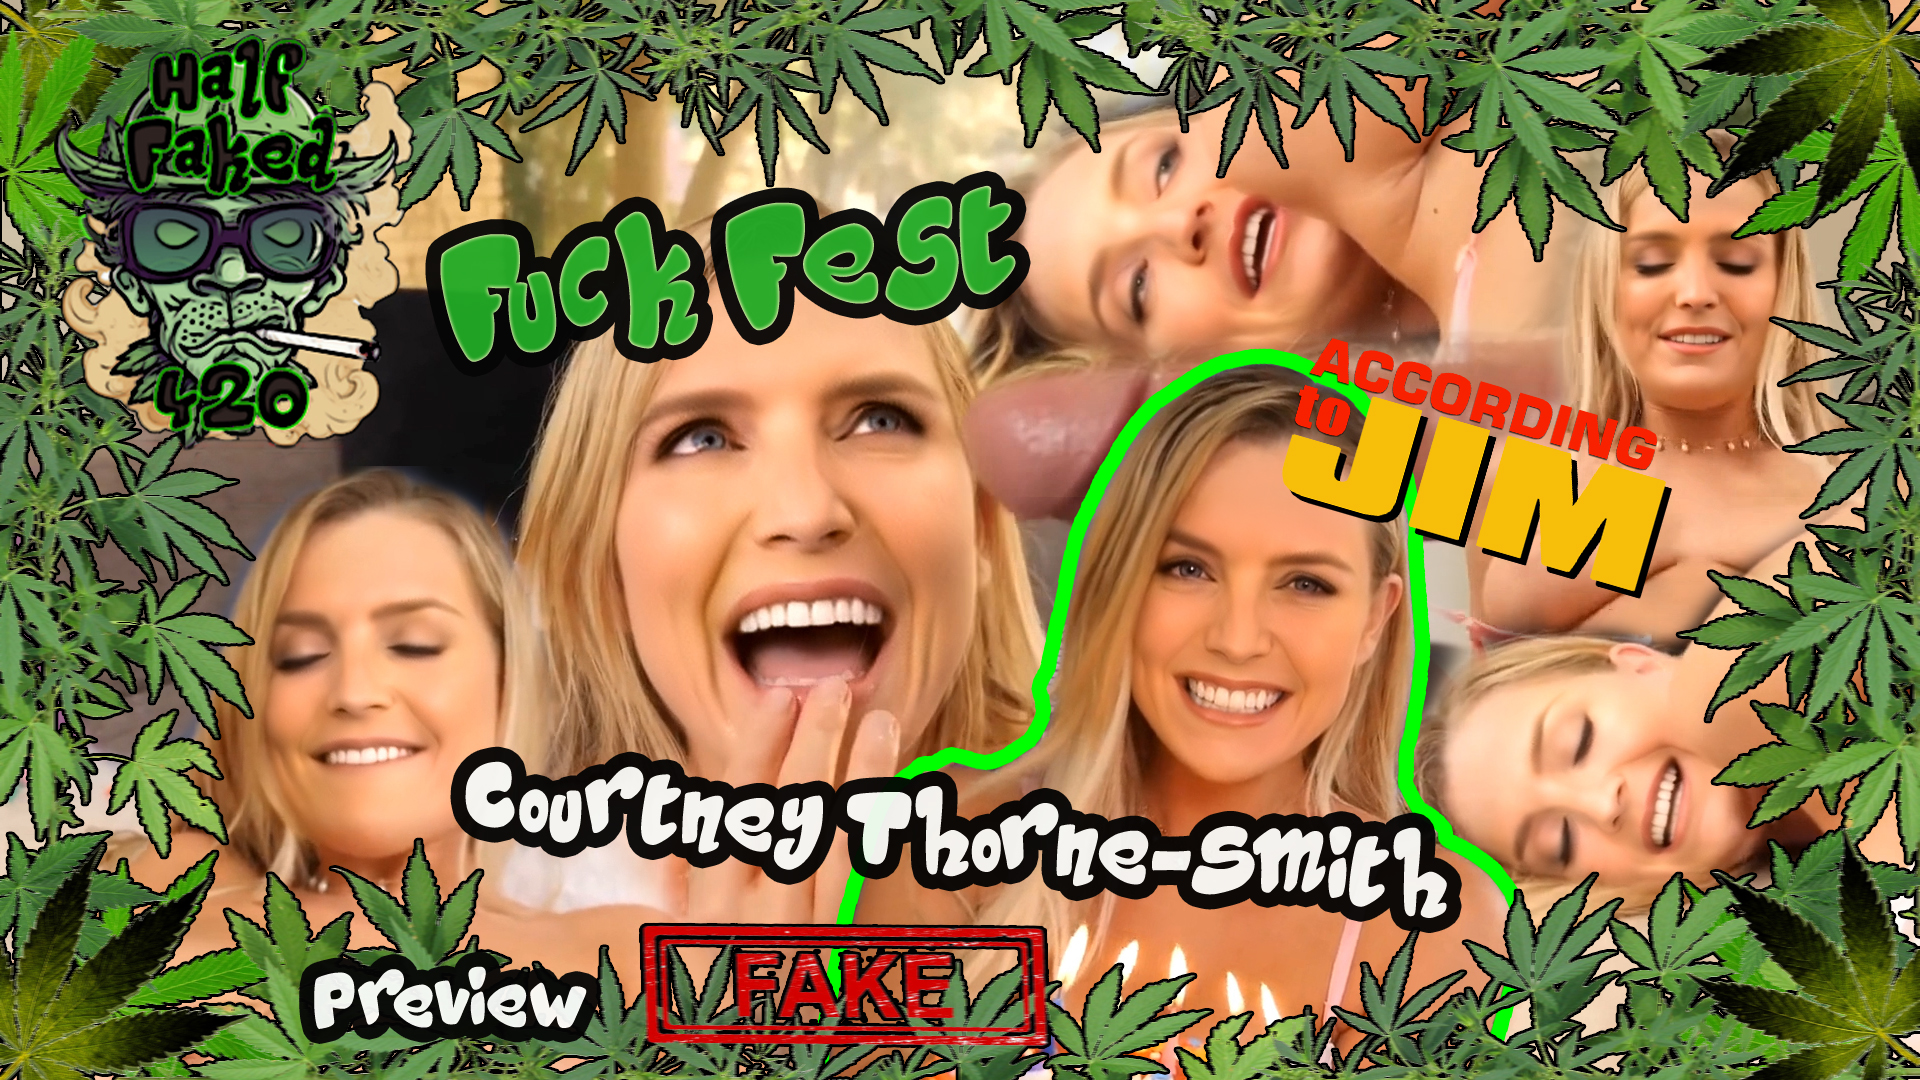 Courtney Thorne-Smith - Fuck Fest | PREVIEW (21:23) | FAKE